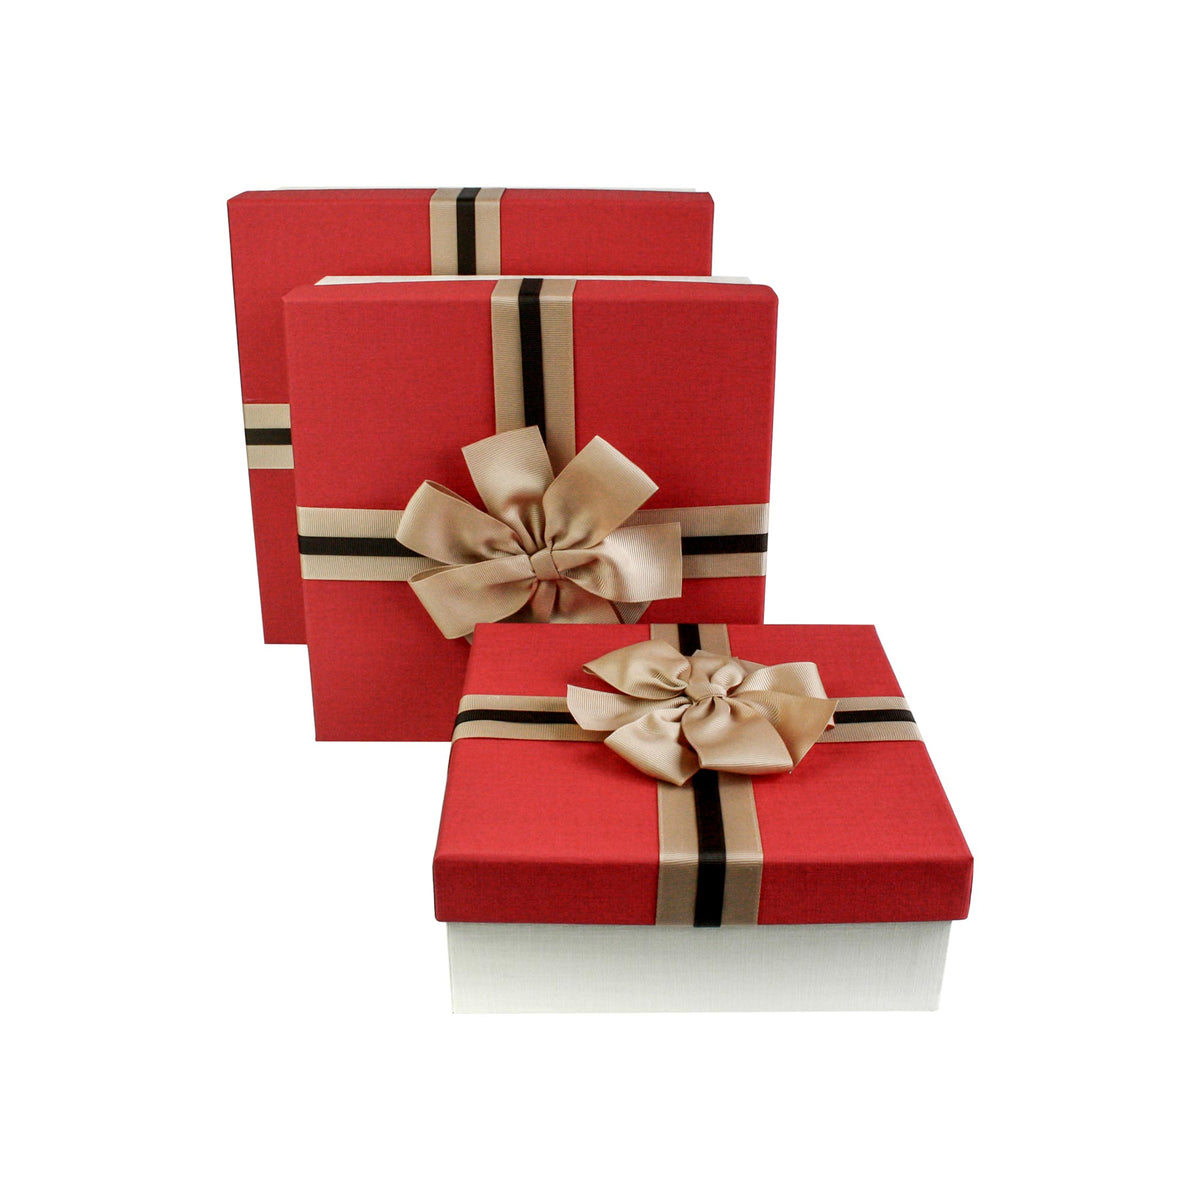 Set of 3 Square Cream/Red Gift Boxes With Brown Satin Ribbon